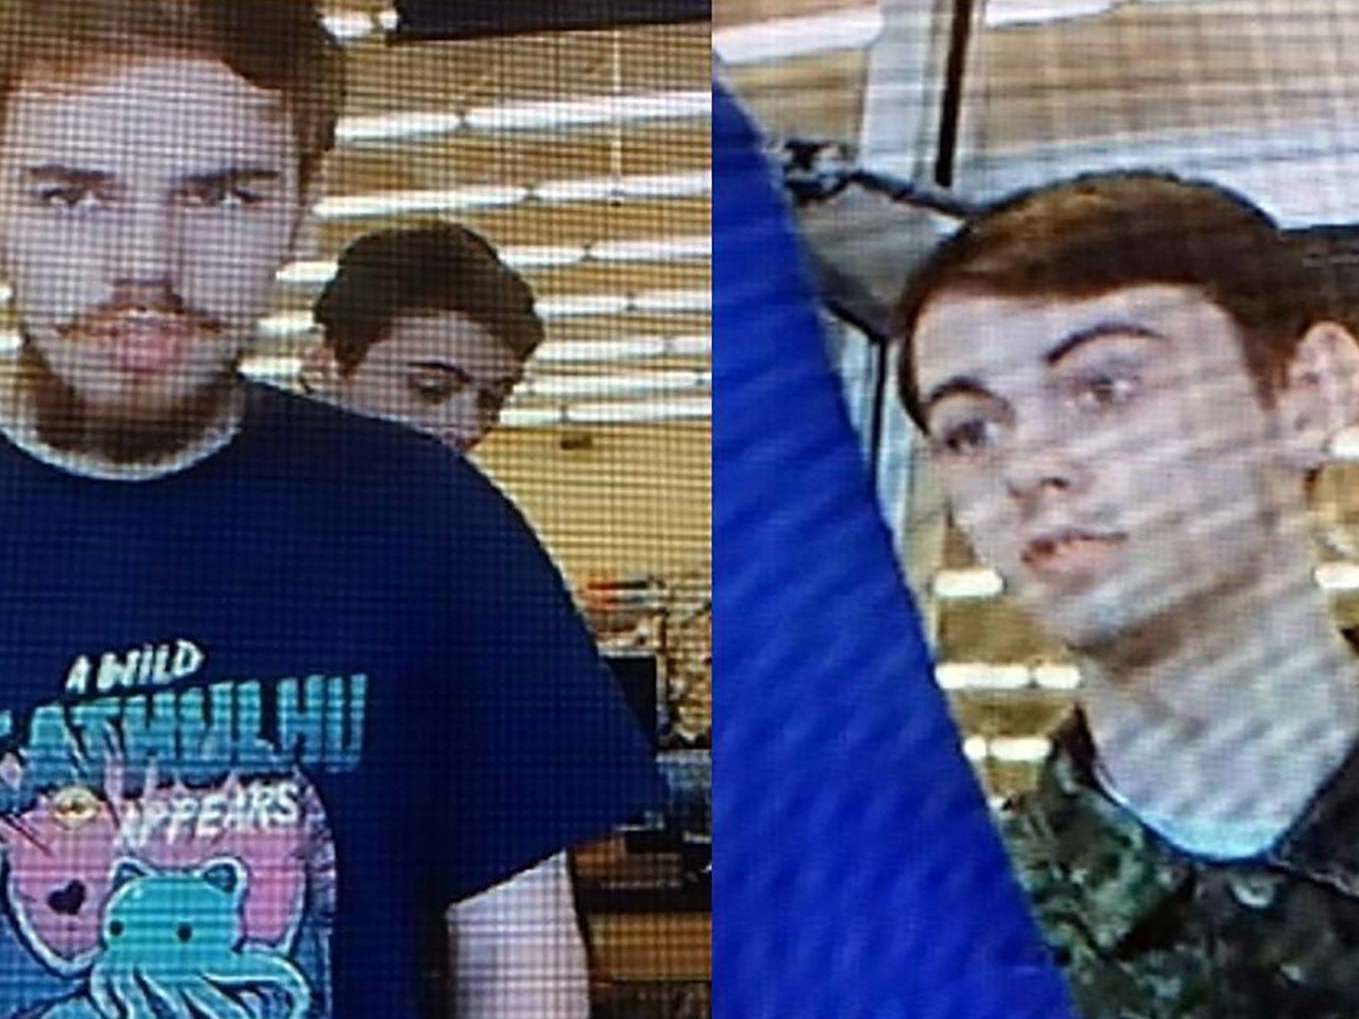 Kam McLeod, 19 and Bryer Schmegelsky, 18, wanted by Canadian police